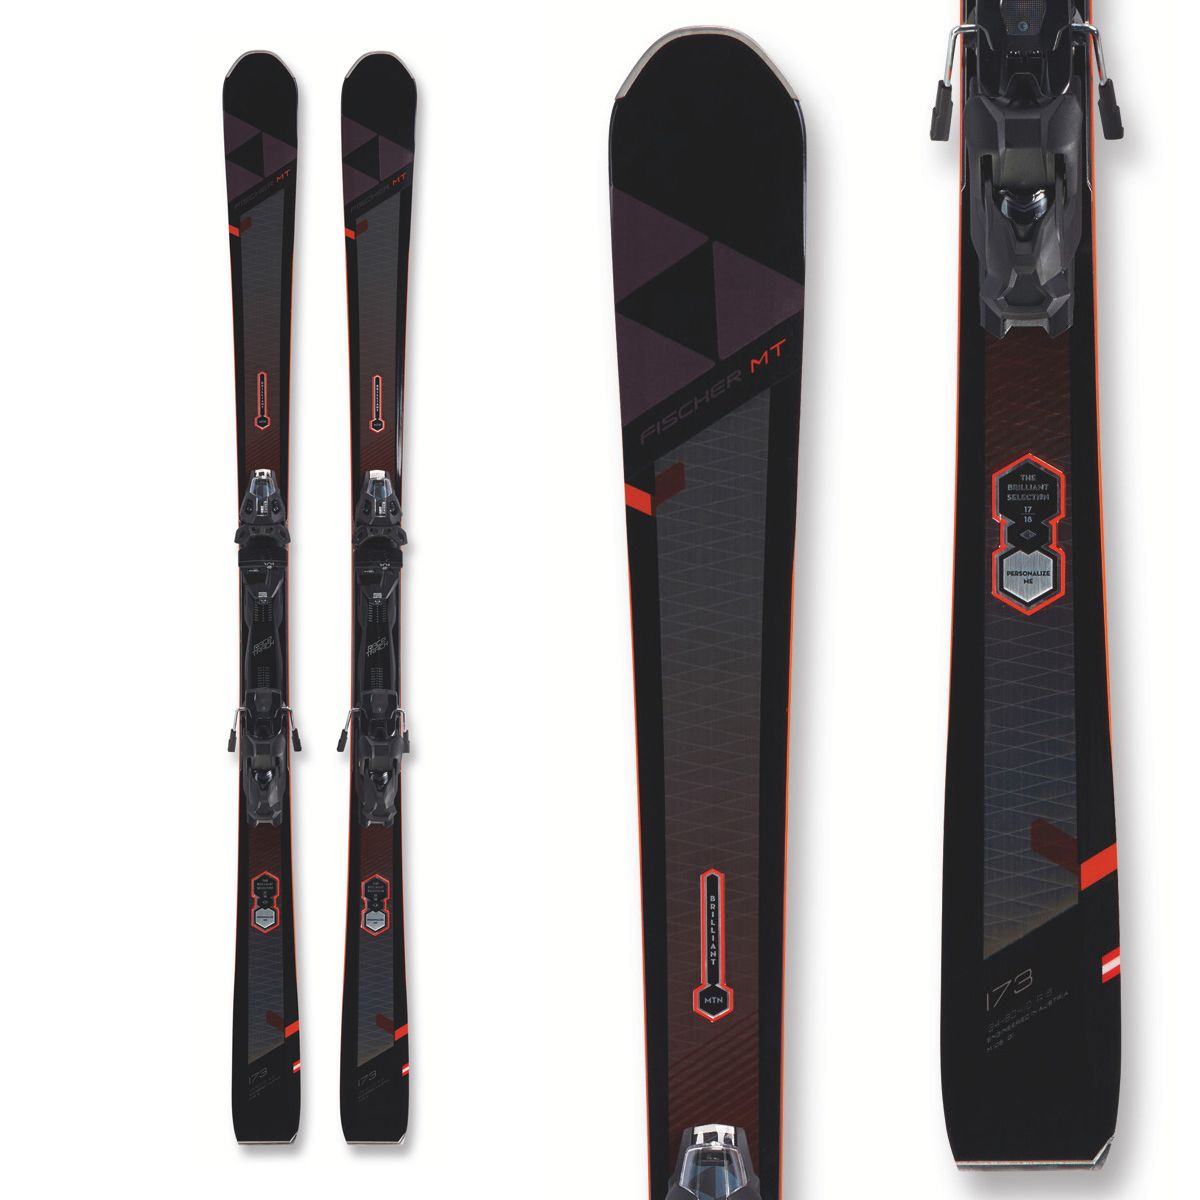 Pack skis BRILLIANT MT + Fixation MBS 12